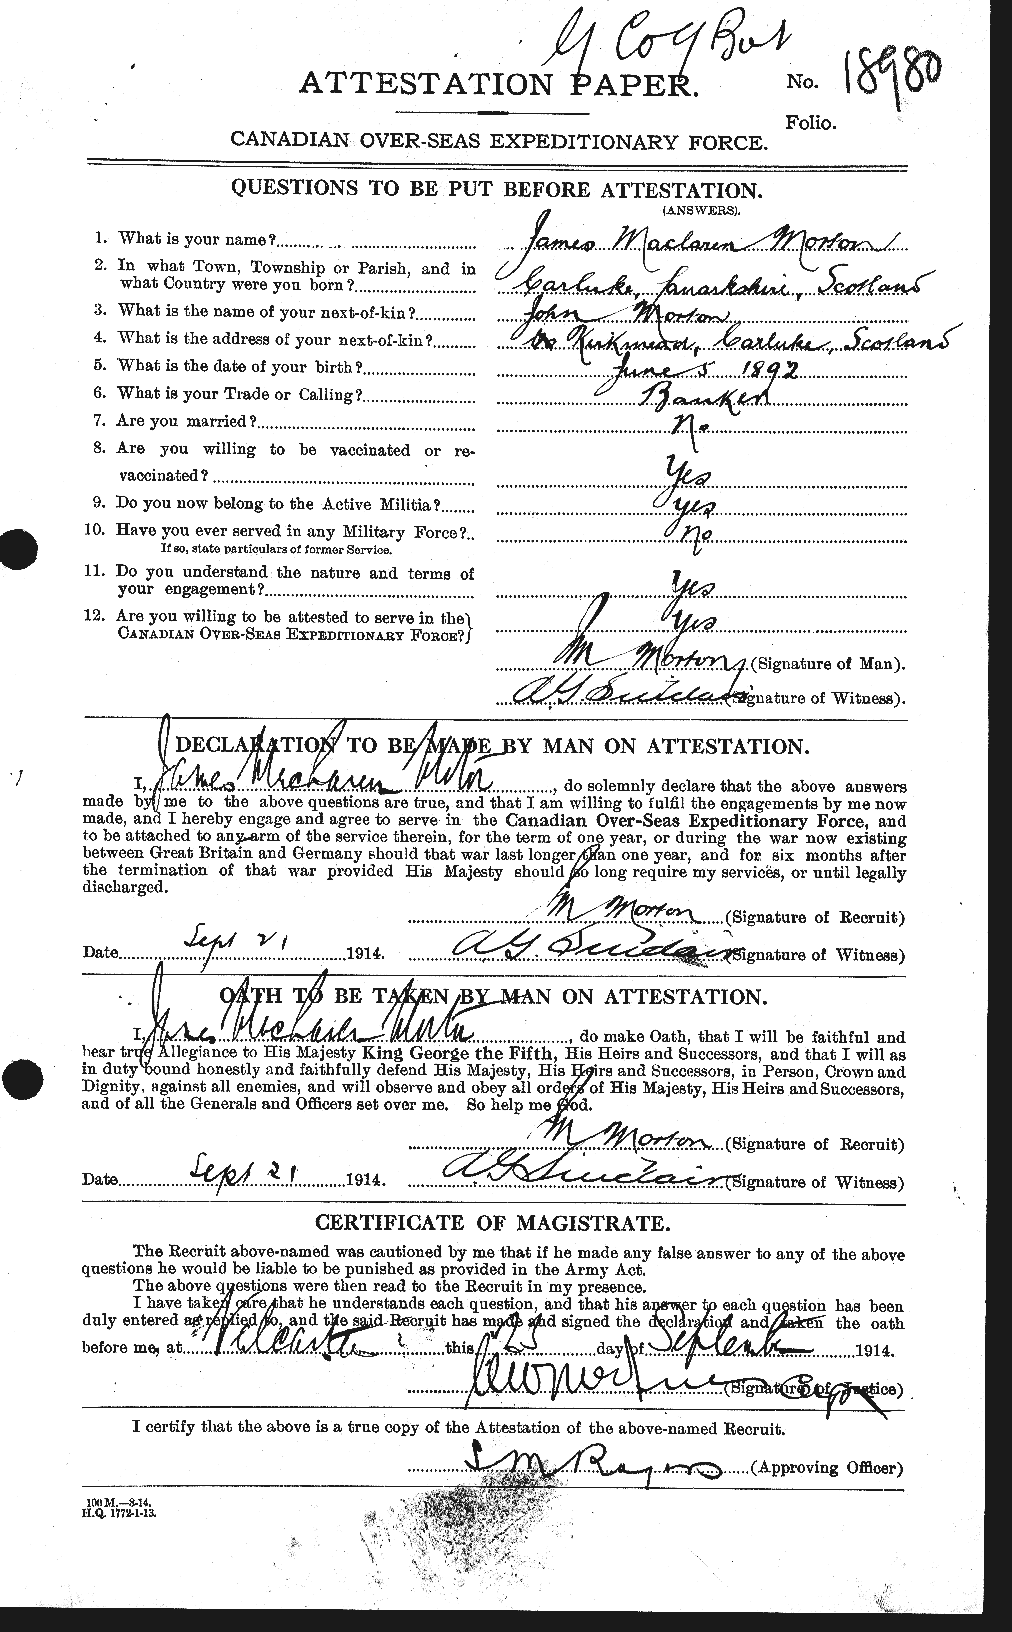 Personnel Records of the First World War - CEF 509900a